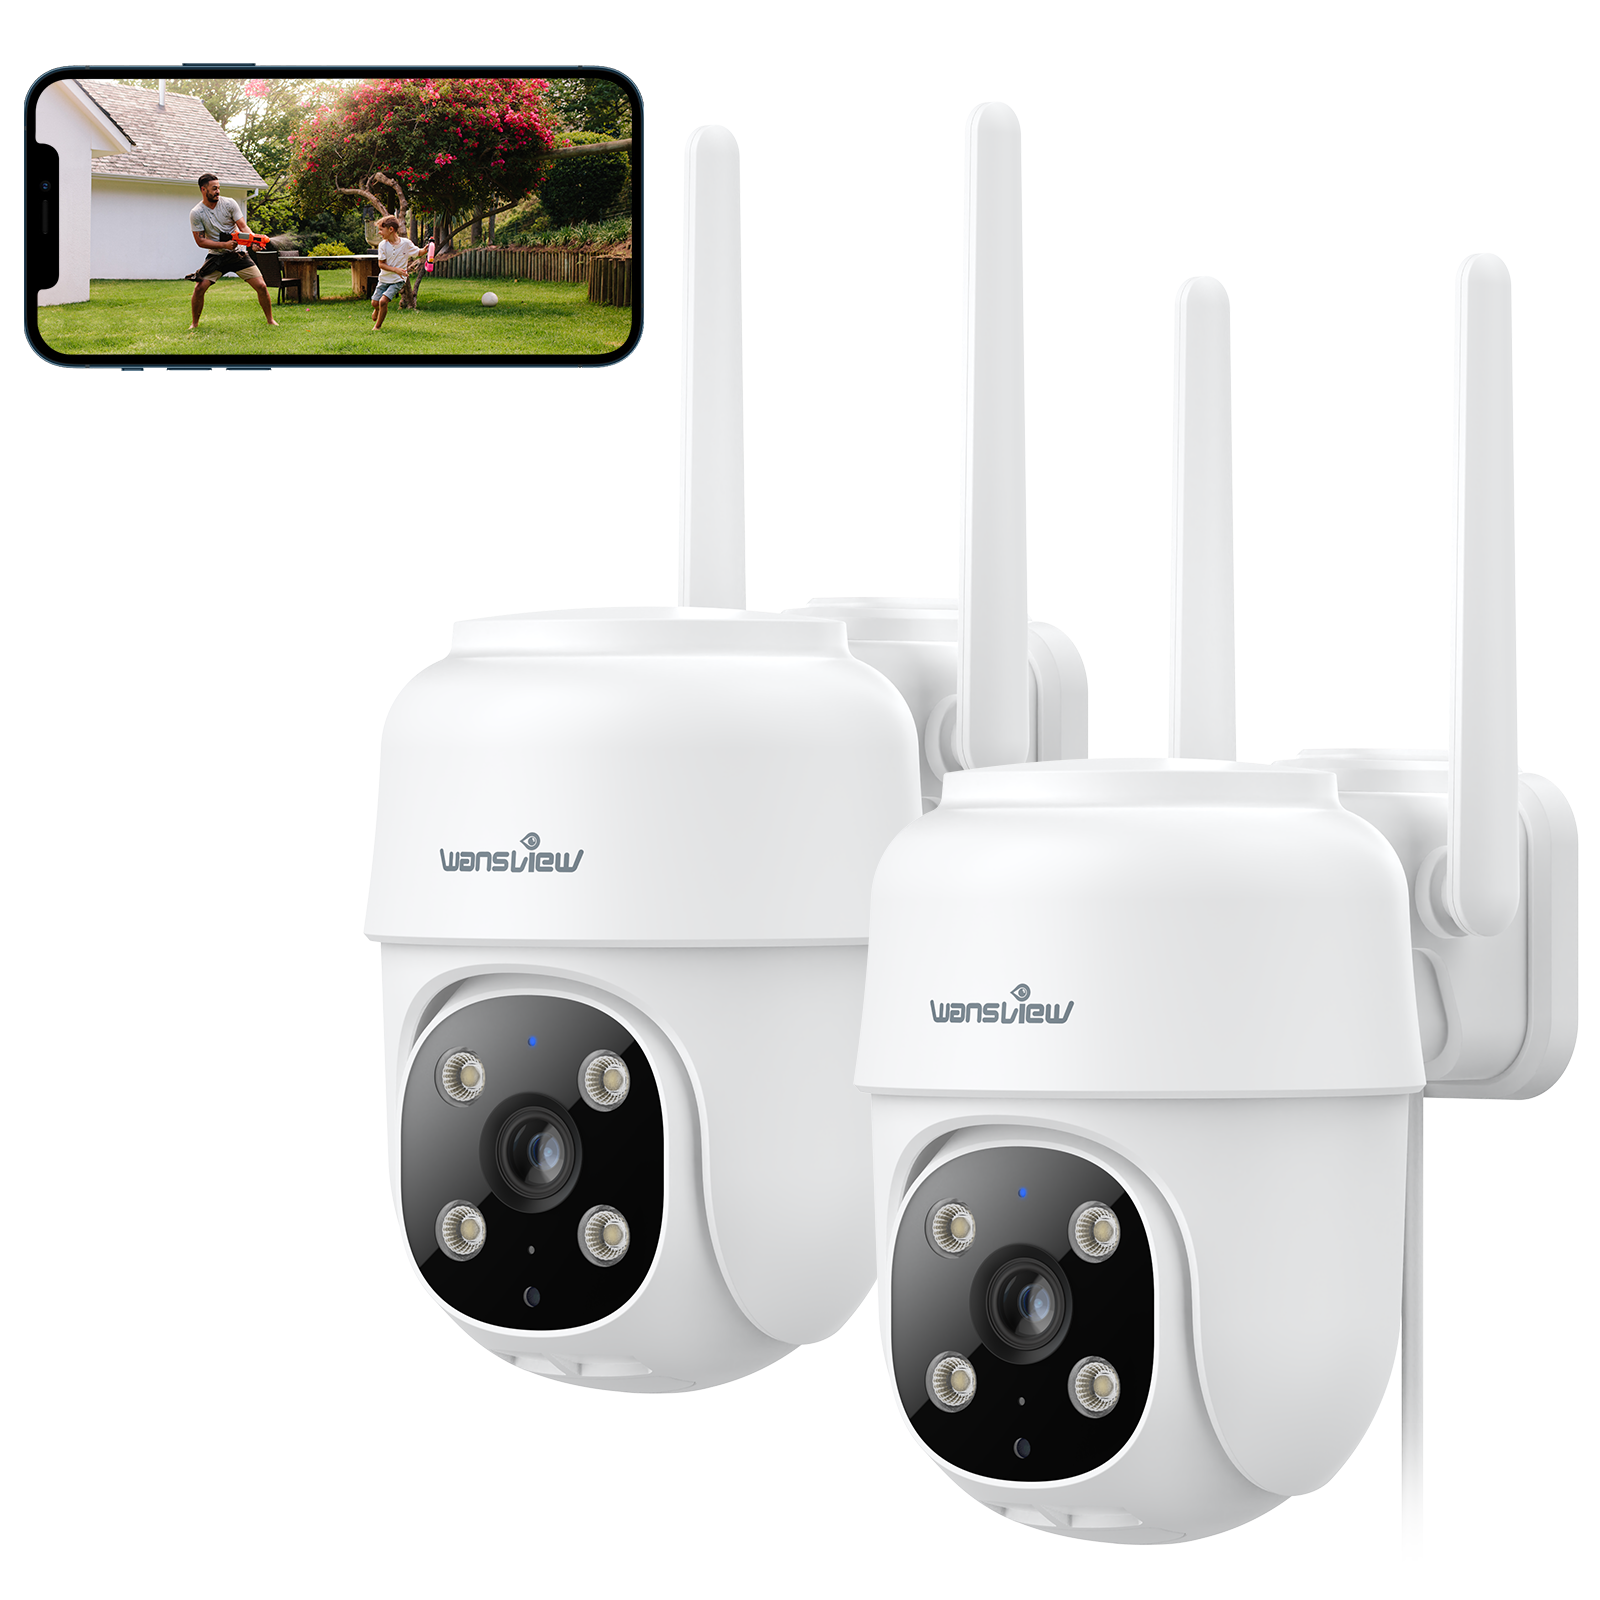  wansview Outdoor Security Camera, 1080P Wireless WiFi